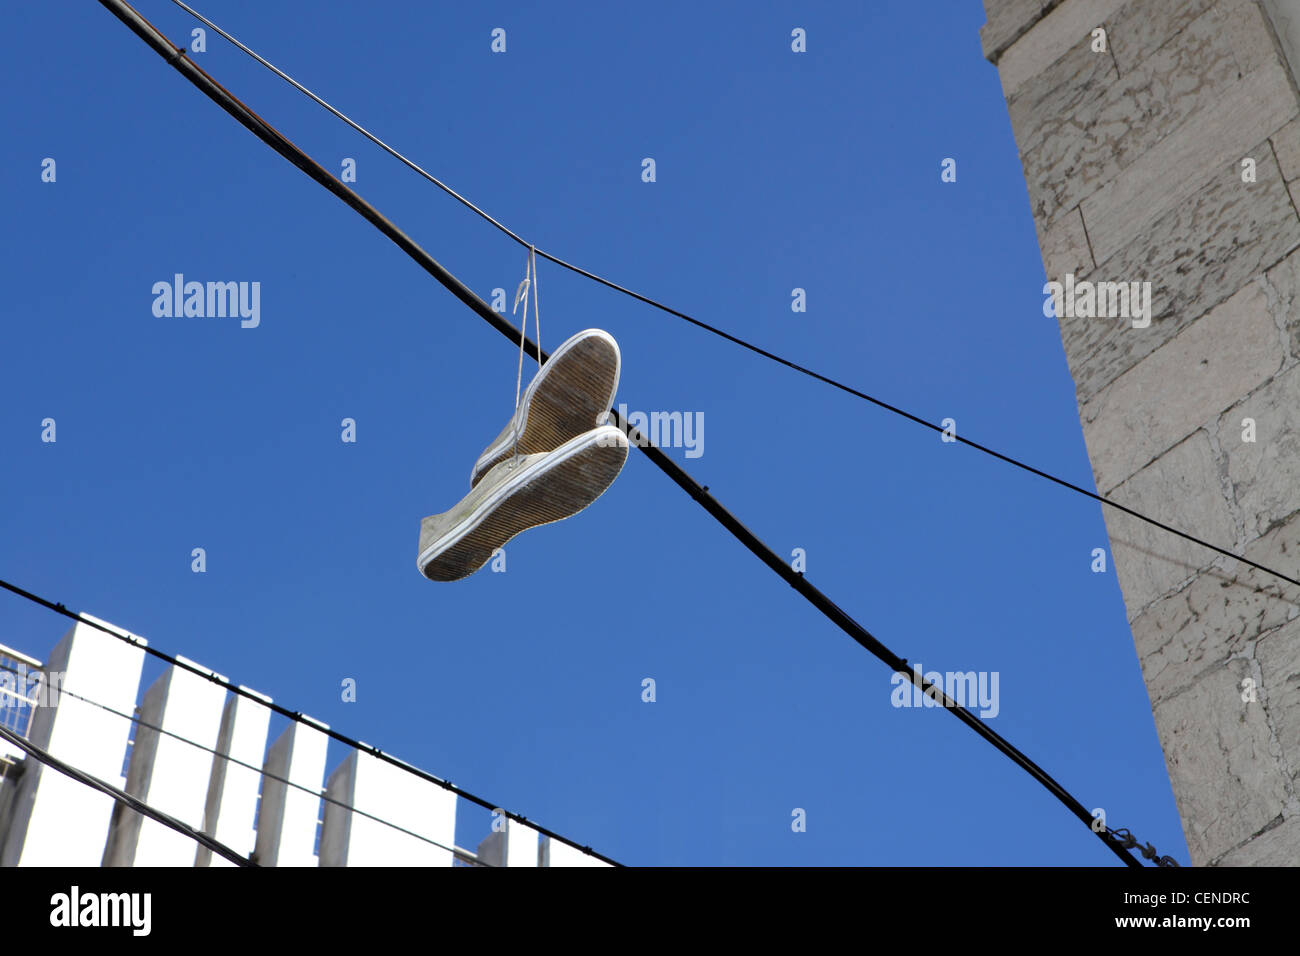 Shoefiti, youth culture rite of passage, central Lisbon, Portugal. Stock Photo